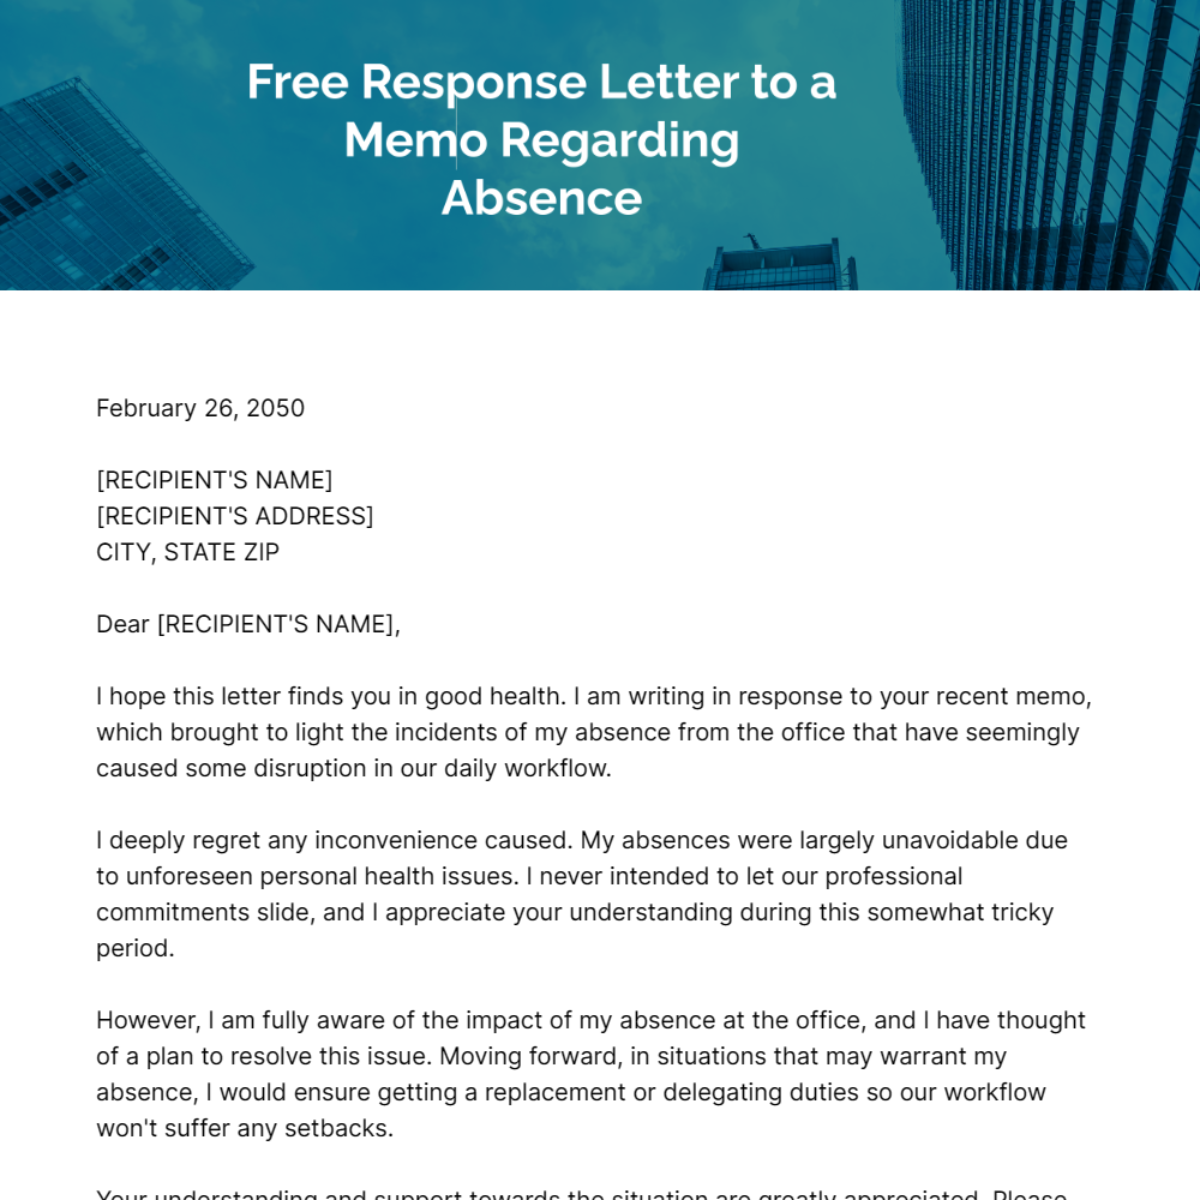 Free Response Letter to a Memo Regarding Absence